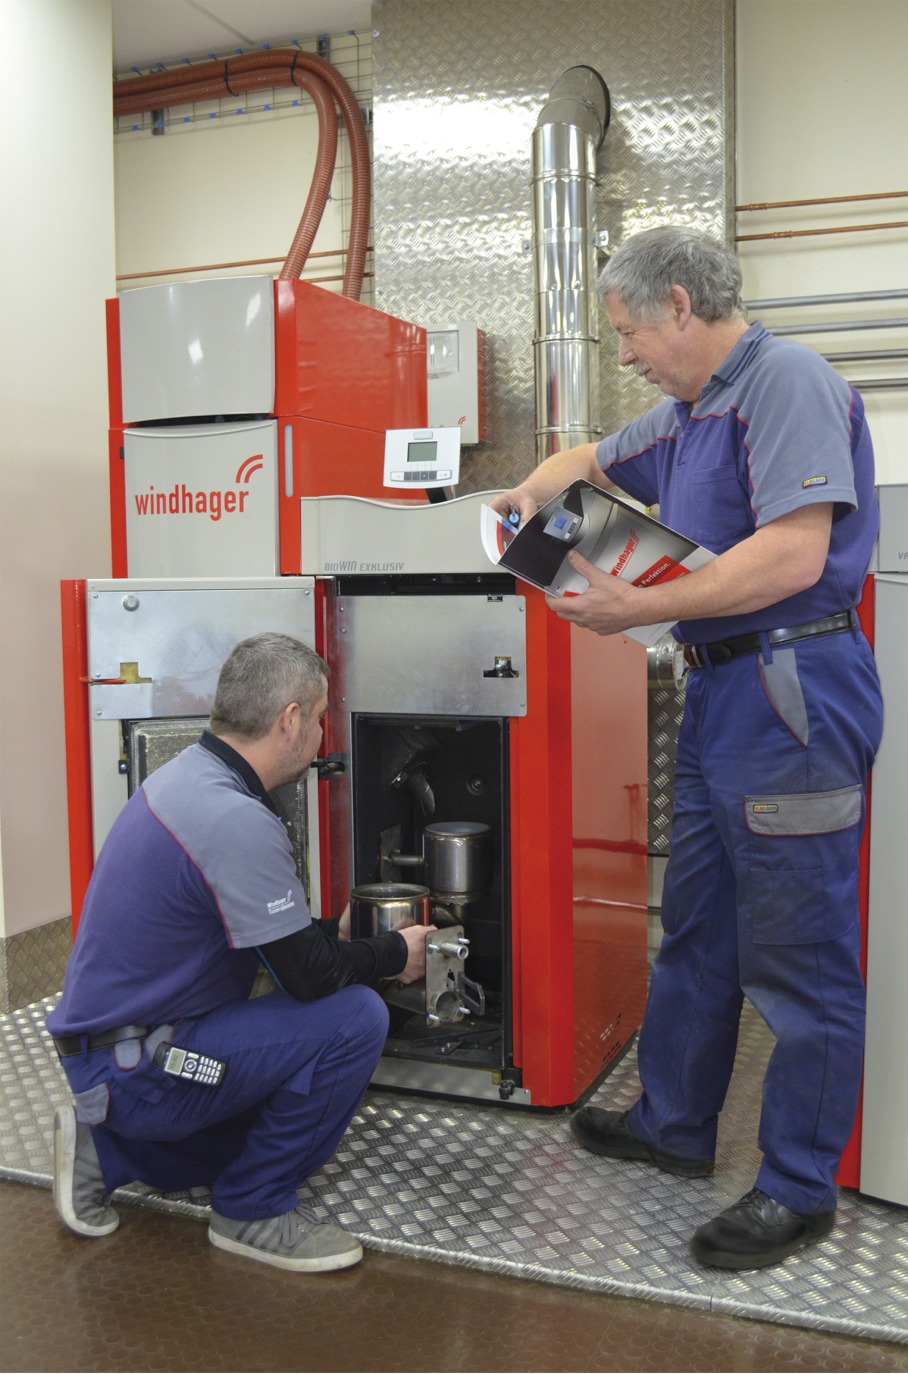 biomass boilers, renewable energy client, training centre, this and HETAS course promoted in the press